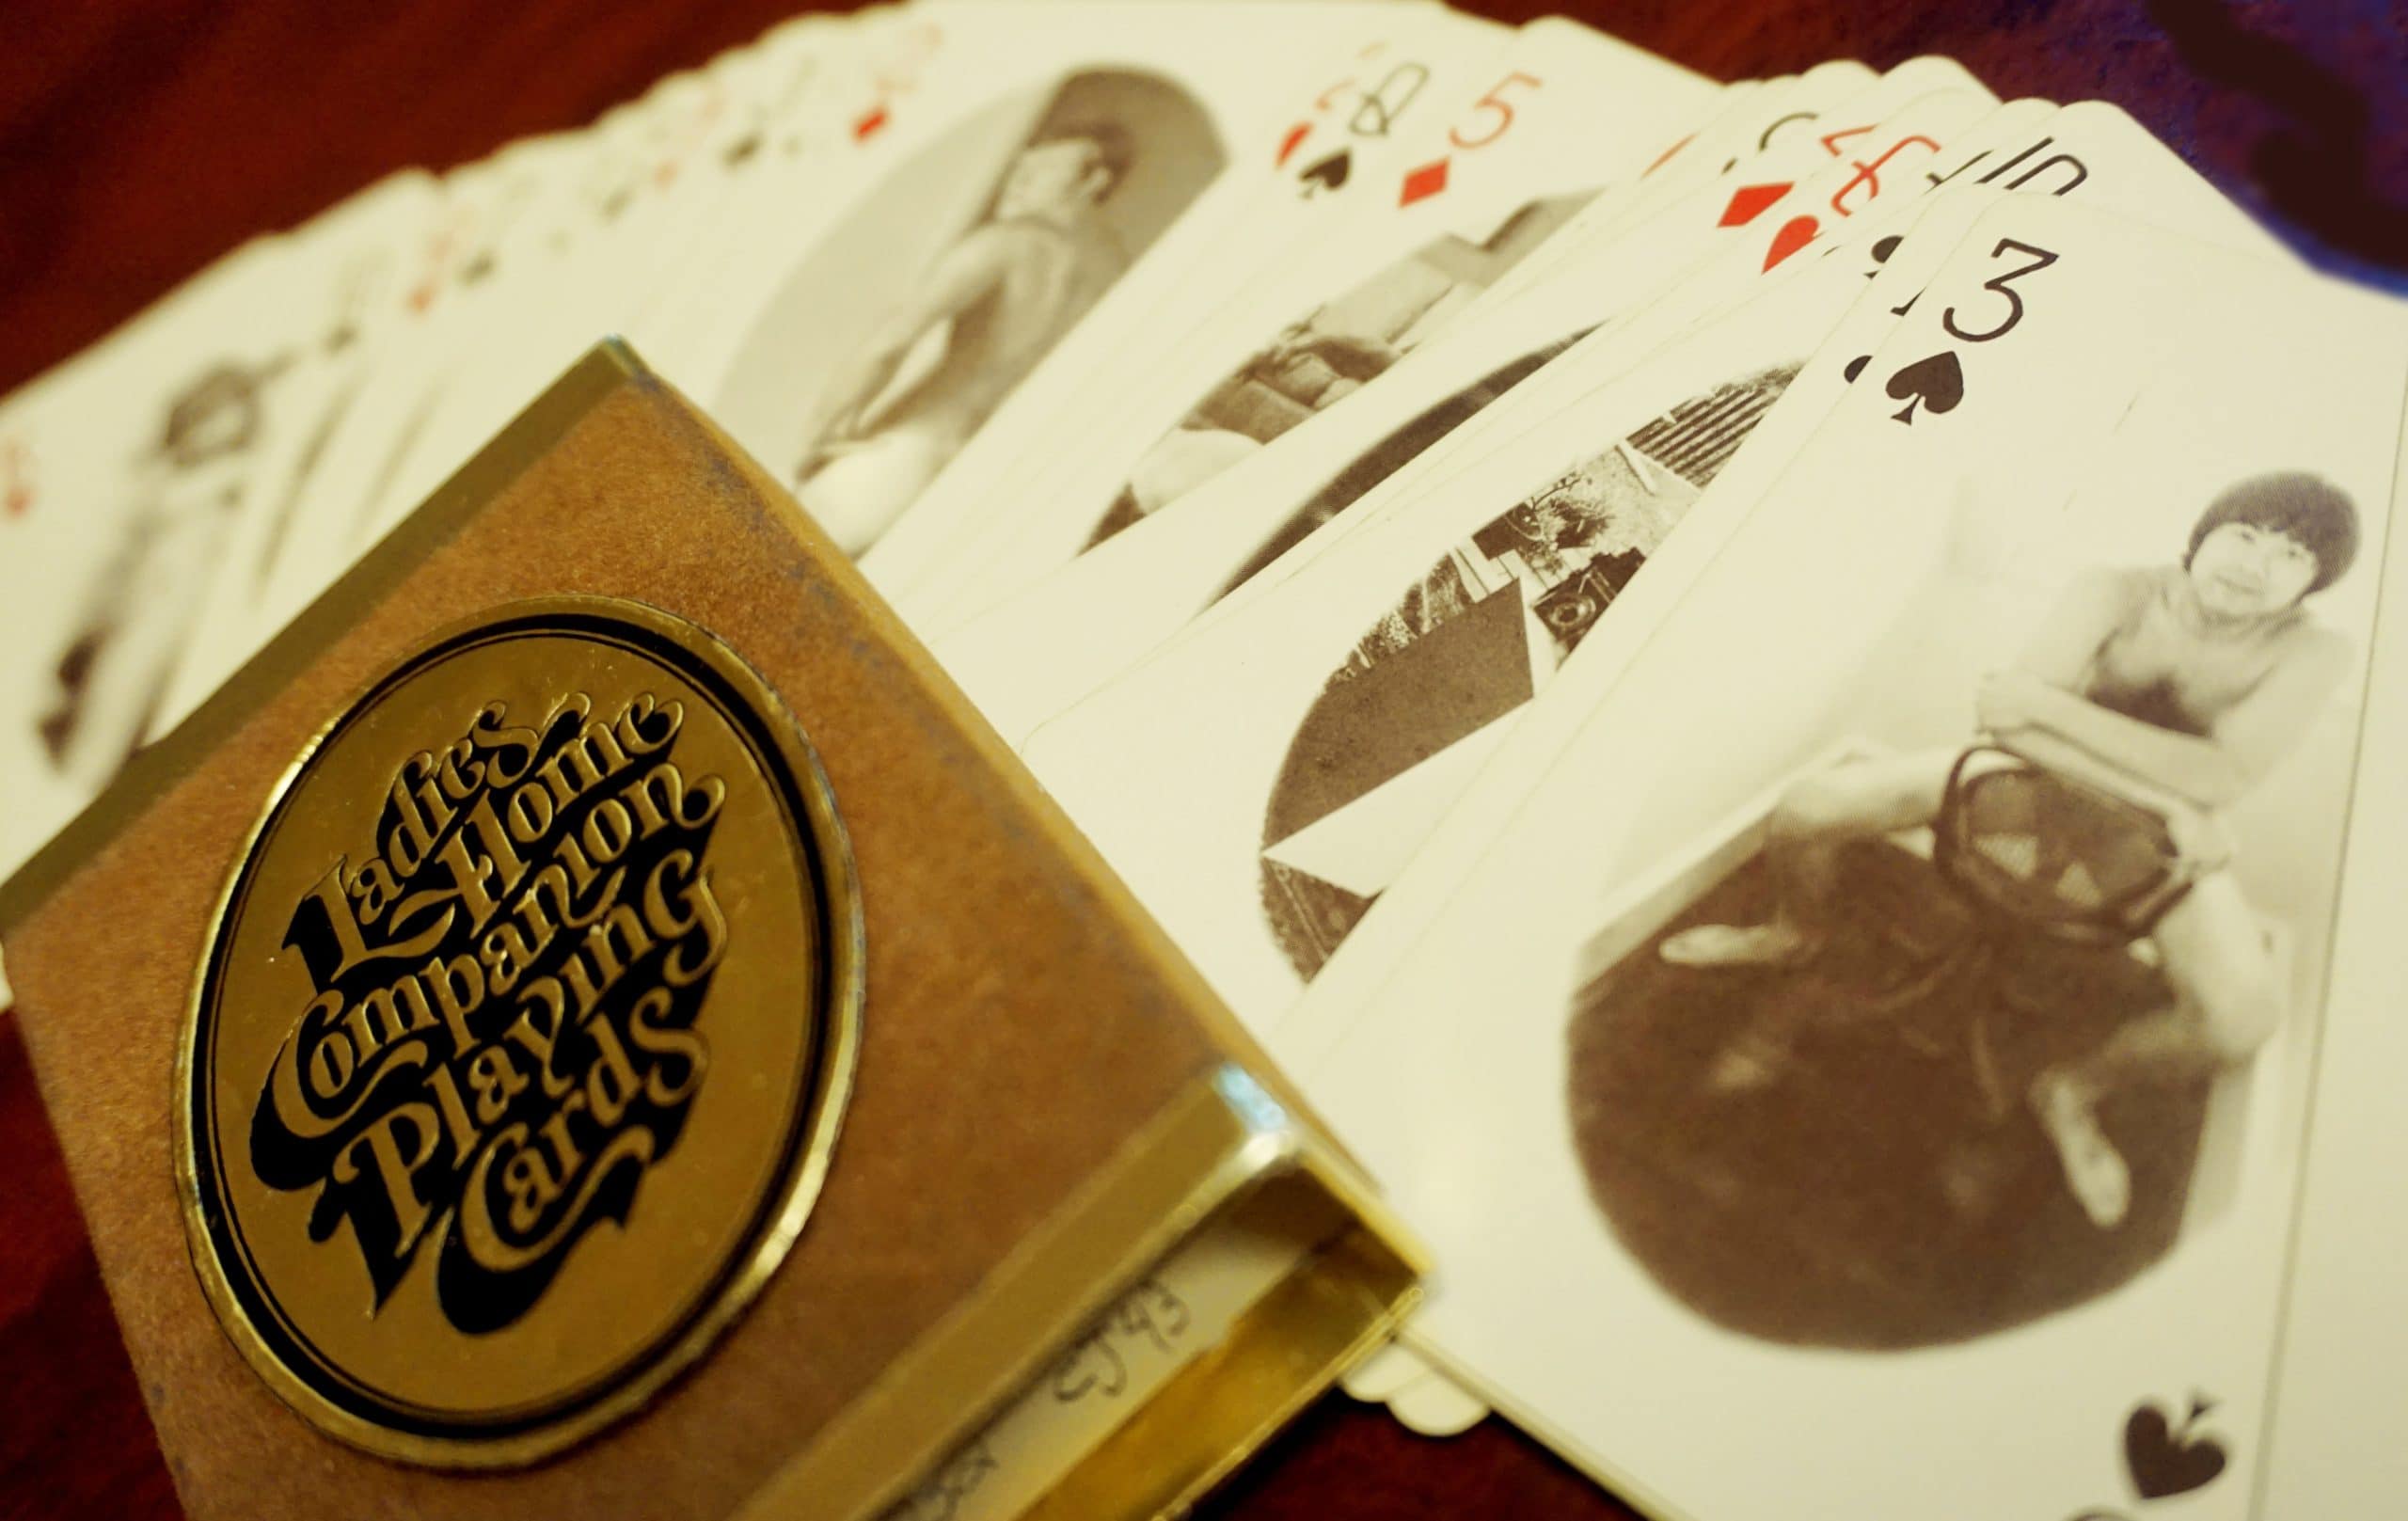 Ladies Home Companion playing cards spread out on a table. The card case is in the foreground and the 3 of spades remains in focus with an Asian nude model on it.